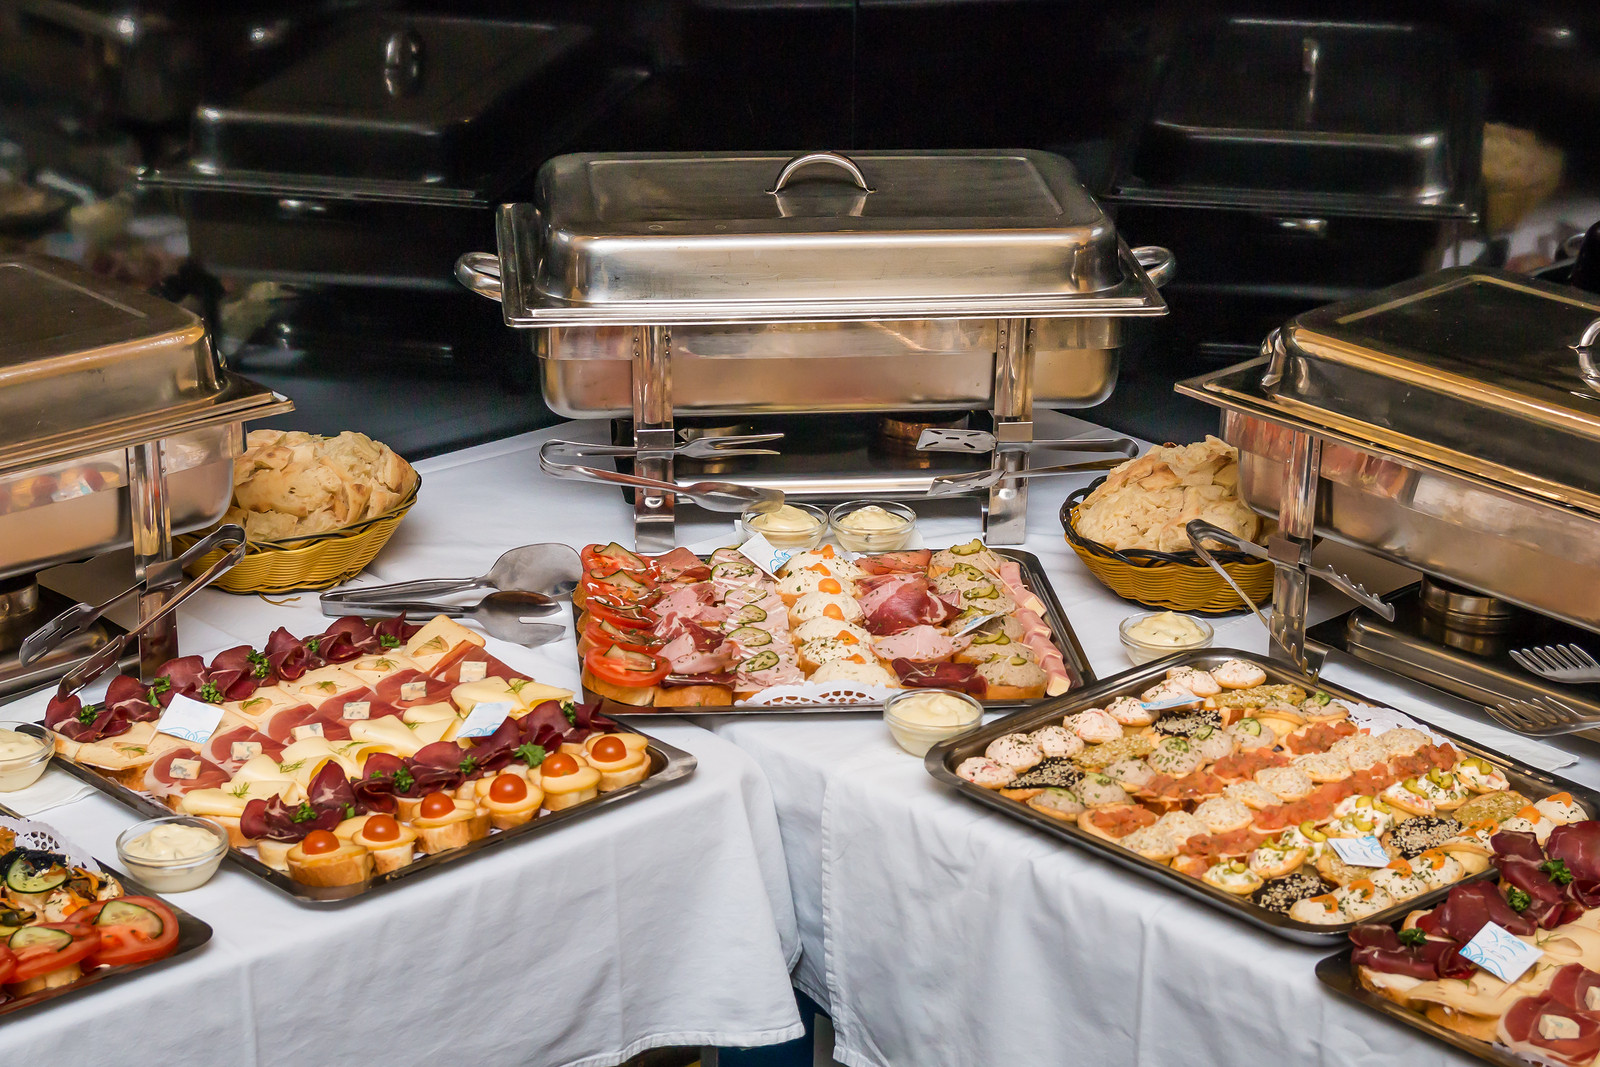 Graduation Party Catering Ideas
 Graduation Party Ideas A Guide To The Perfect Party For